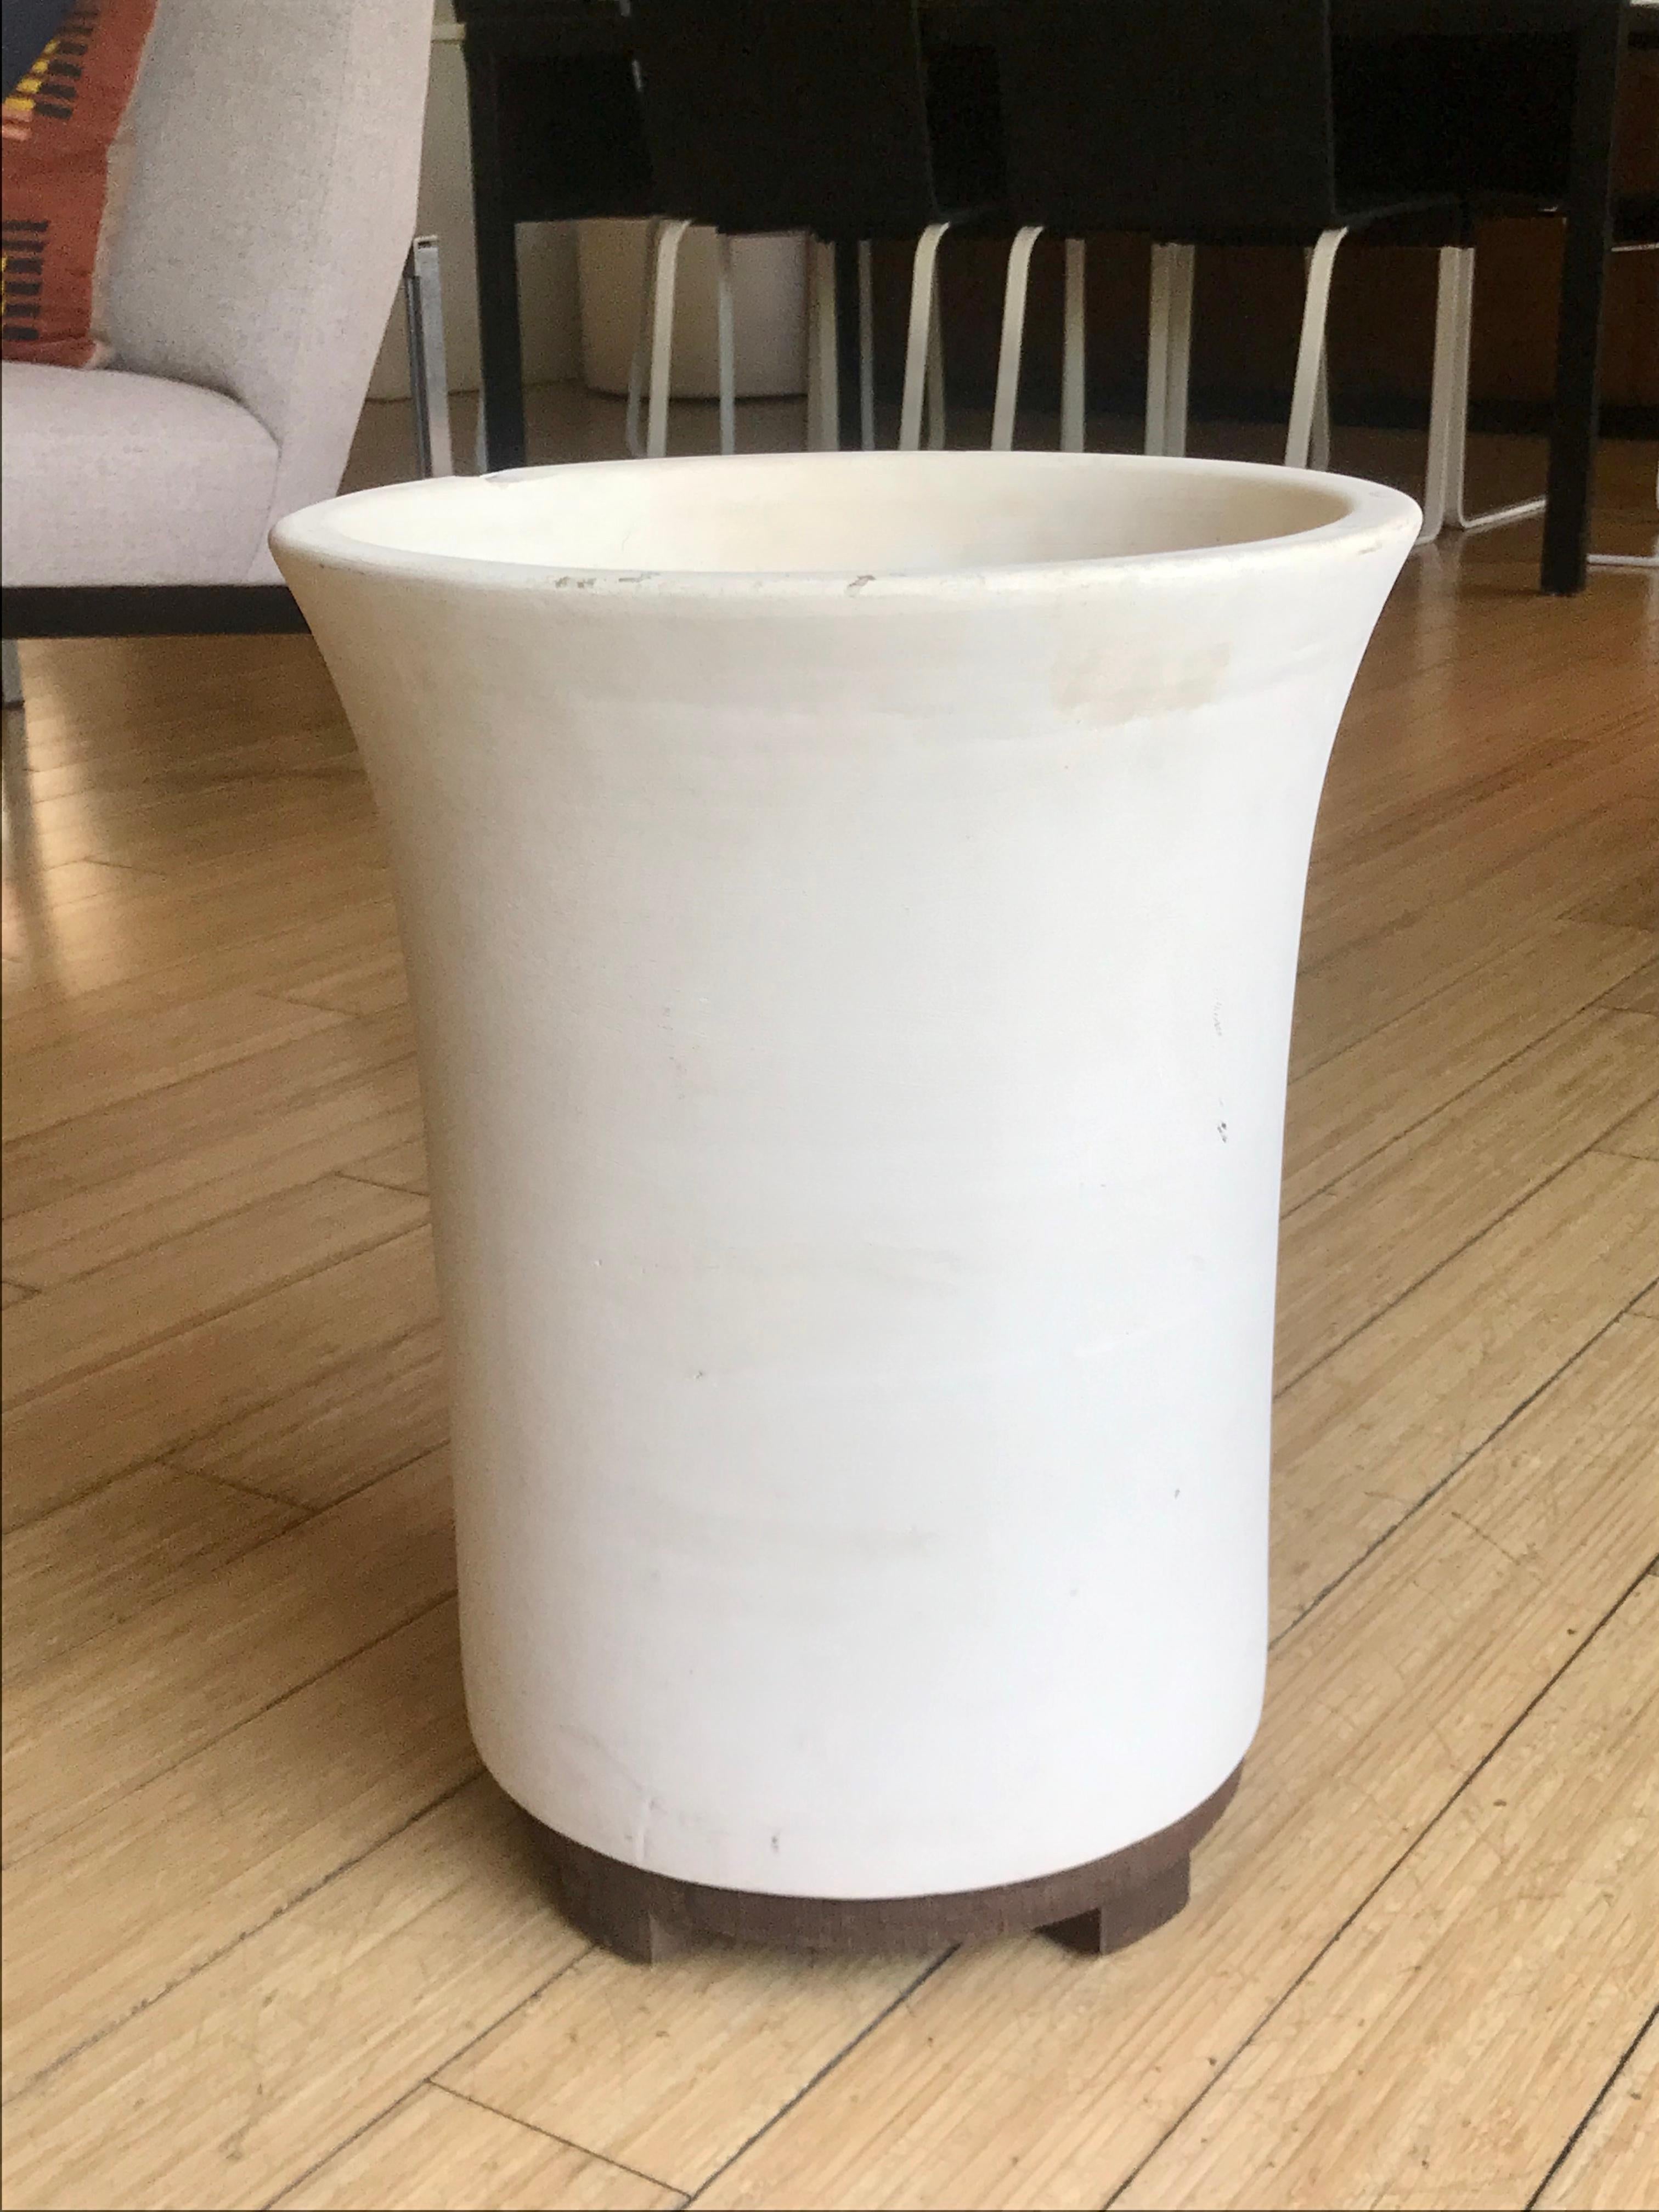 California design
Form + function
Natural bisque clay
Walnut base
Like an old Etruscan vase it has minor wear, a small chip on the rim and a flake at the bottom
No cracks
Rings like a bell
No drain hole
Great for indoors with a bouquet of